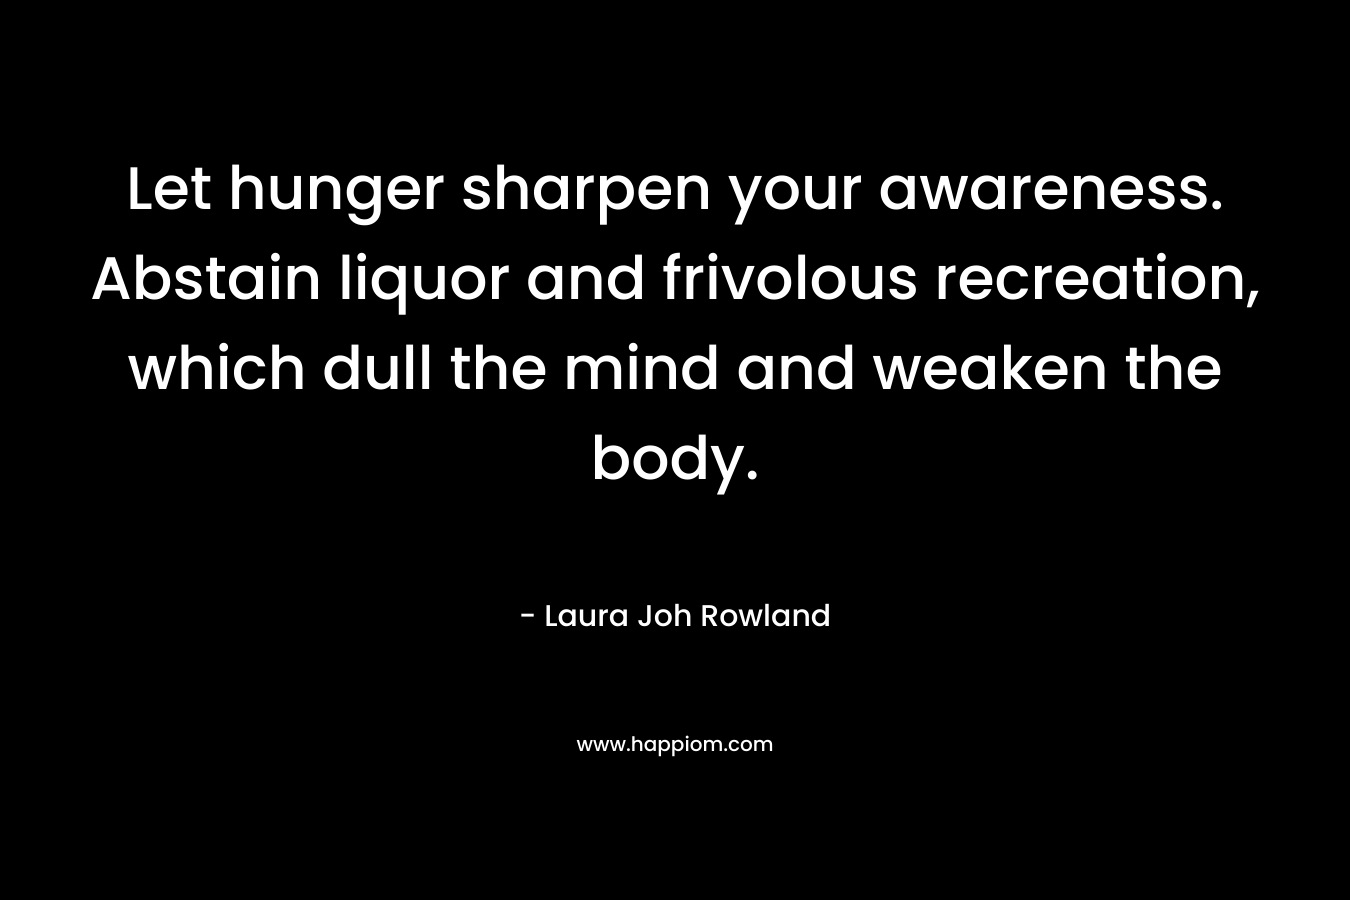 Let hunger sharpen your awareness. Abstain liquor and frivolous recreation, which dull the mind and weaken the body. – Laura Joh Rowland